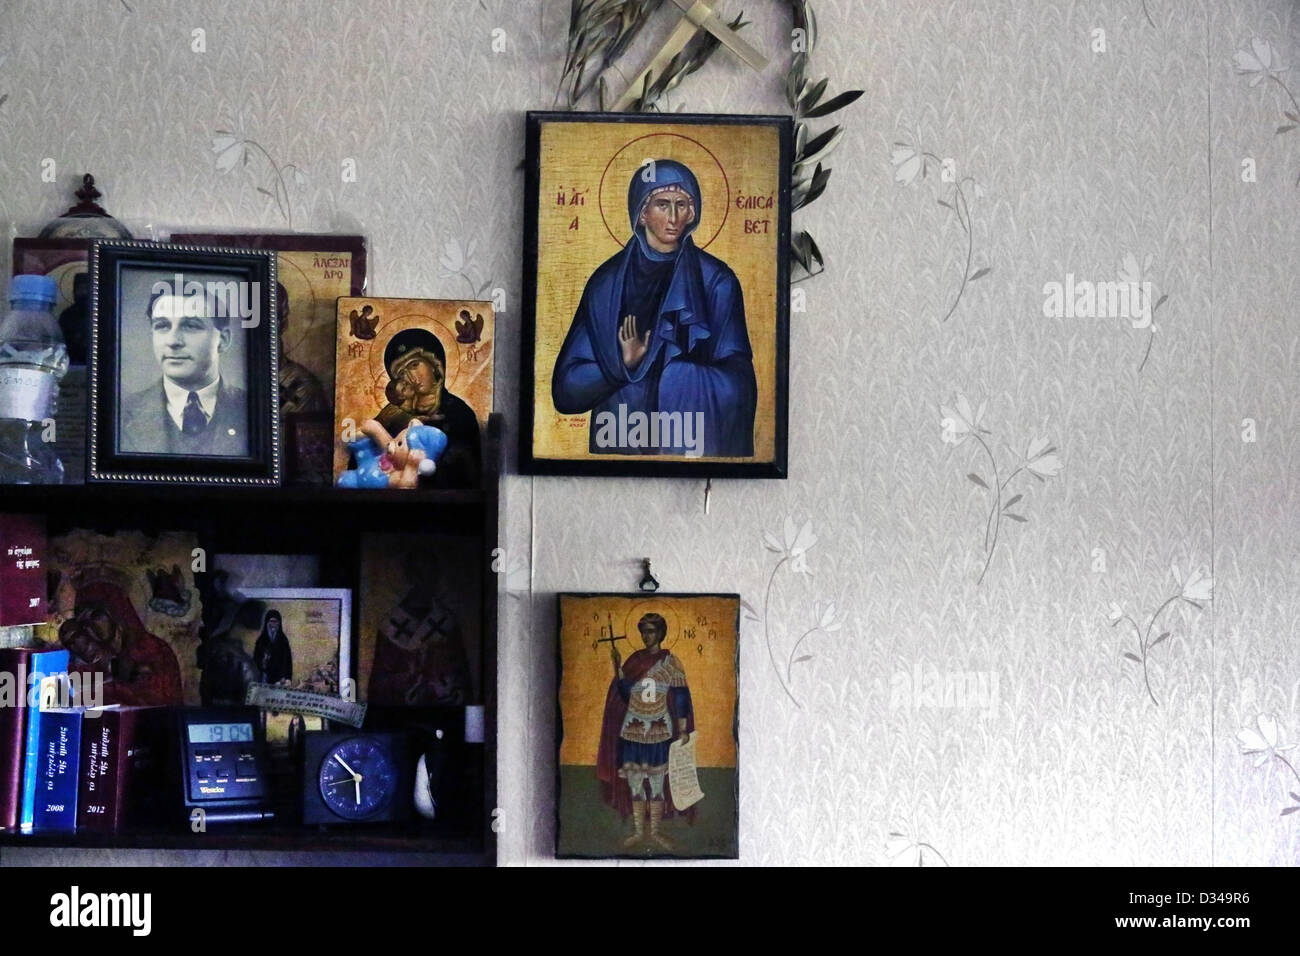 Greek Orthodox Icons On Shelves And Saint Elizabeth Hanging On The Wall With Olive Branch Stock Photo